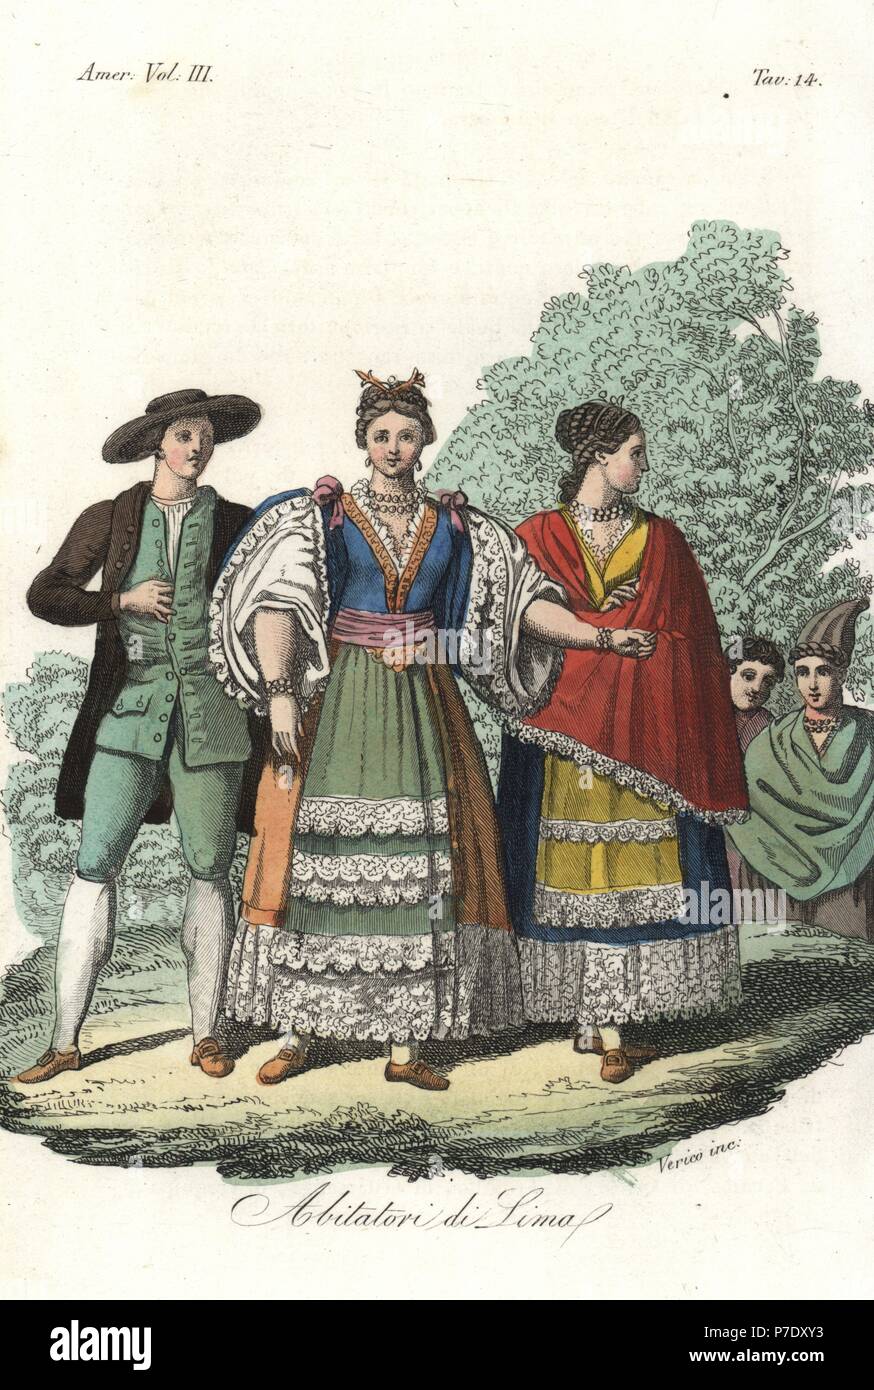 Costumes of the people of Lima, Peru. Handcoloured copperplate engraving by Verico from Giulio Ferrrario's Costumes Antique and Modern of All Peoples (Il Costume Antico e Moderno di Tutti i Popoli), Florence, 1842. Stock Photo